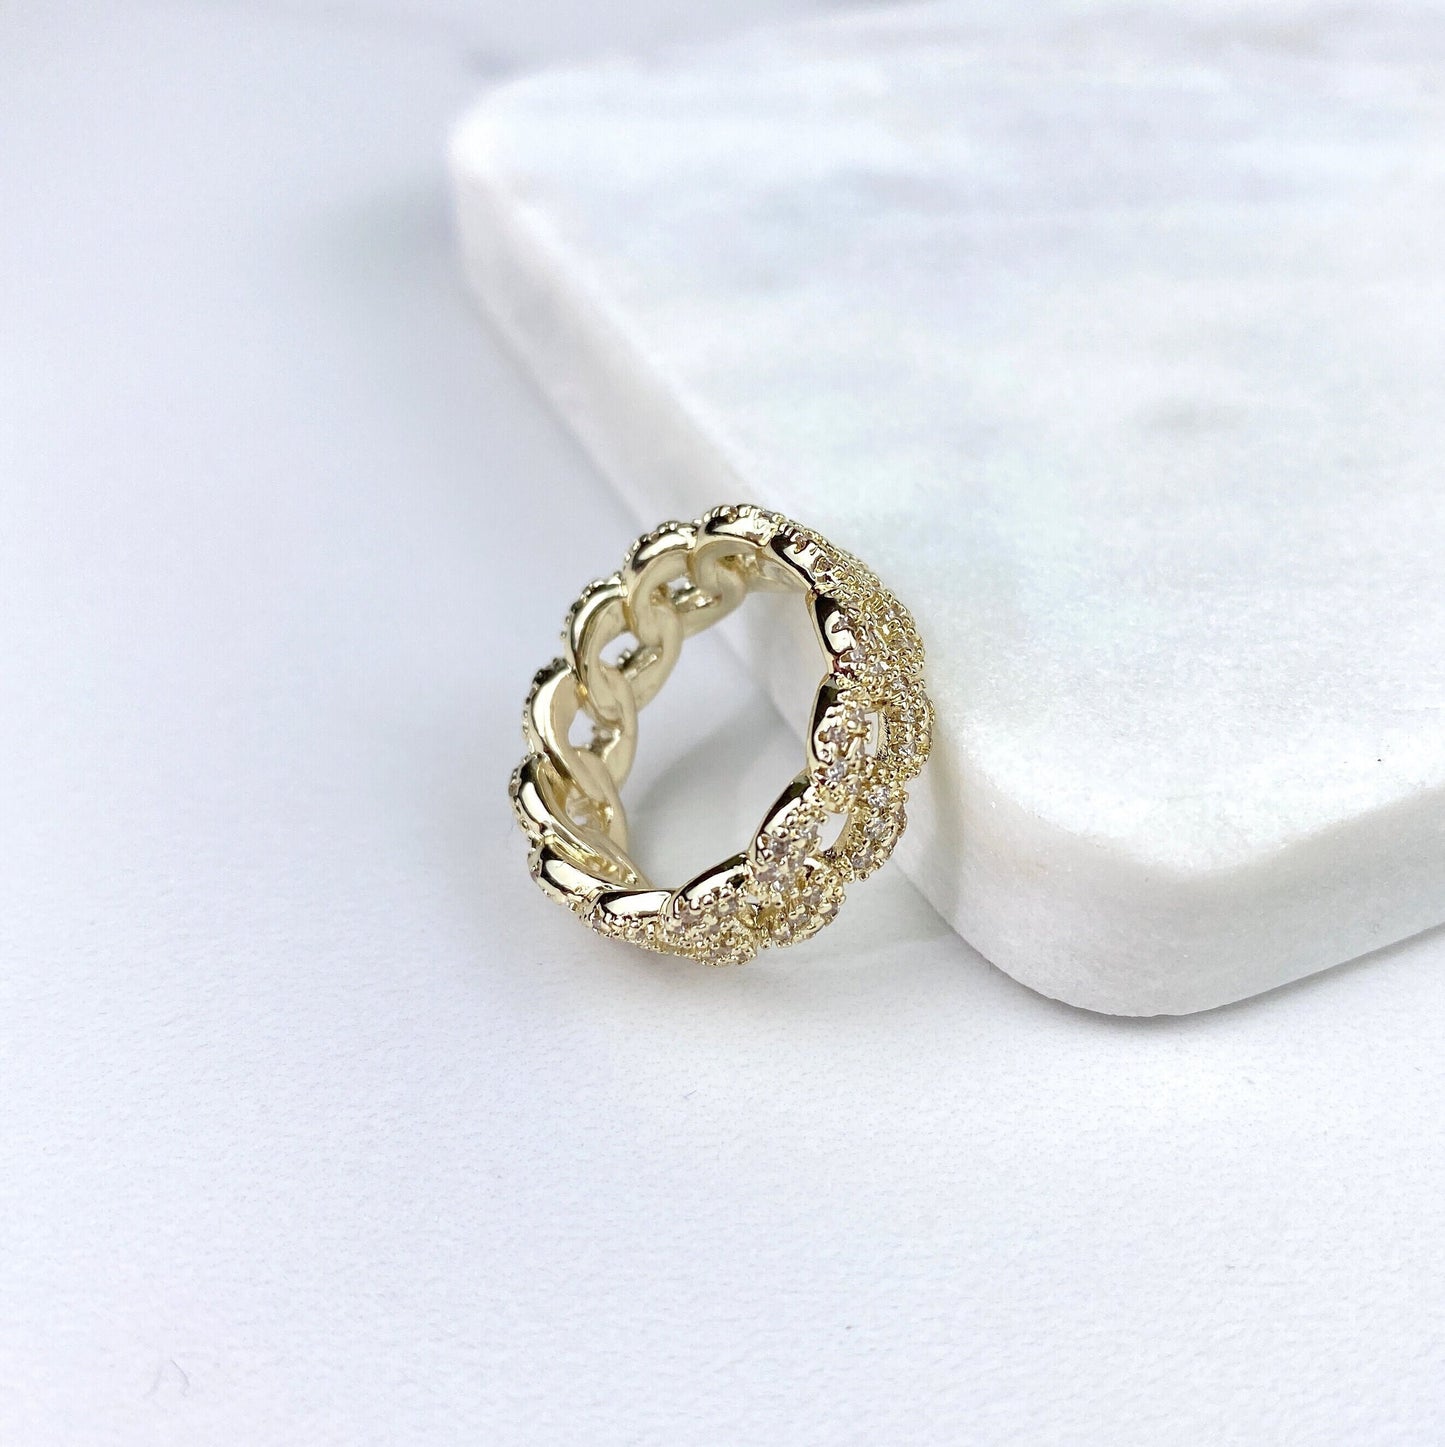 18k Gold Filled Micro Pave Cubic Zirconia Curb Link Ring, Gold or Silver, Wholesale Jewelry Making Supplies